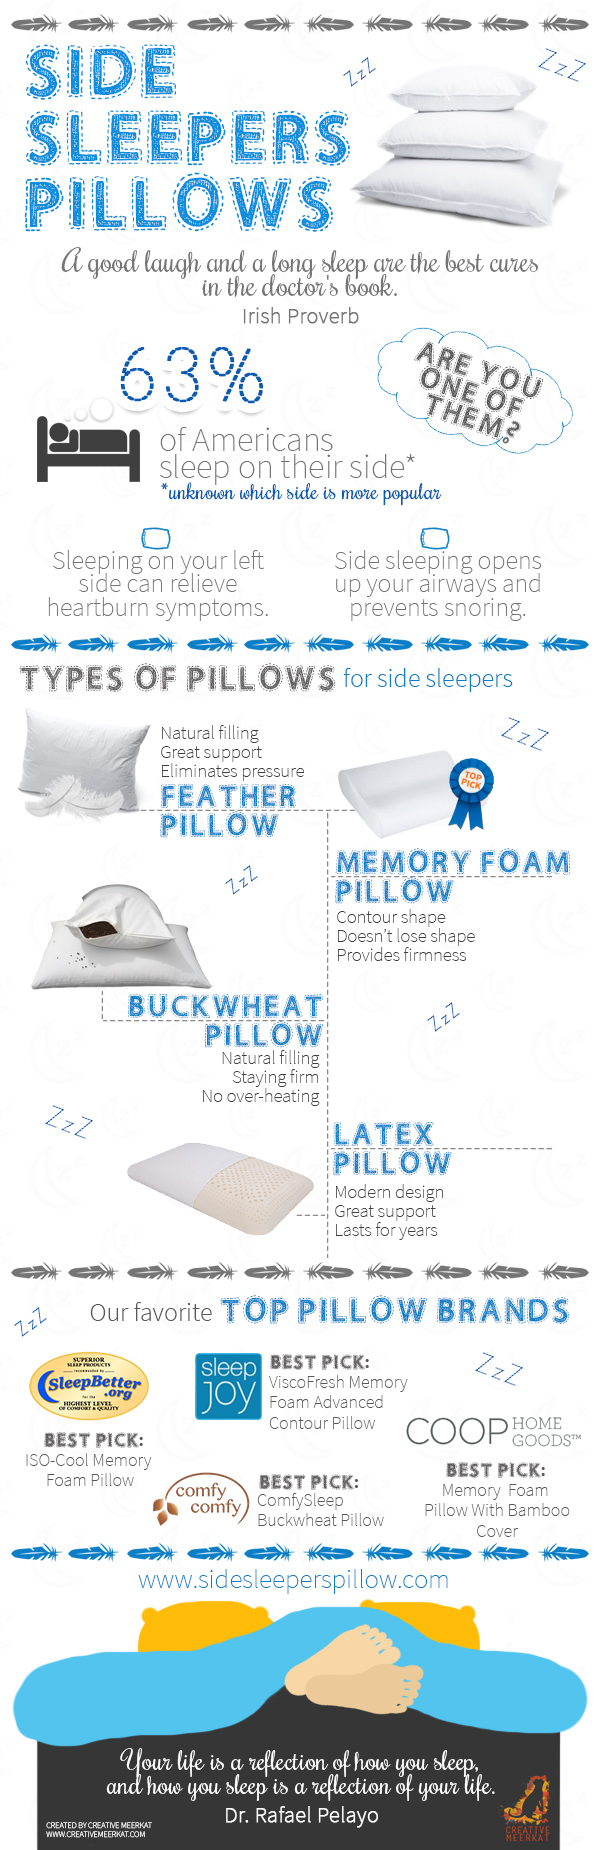 Side Sleepers Pillows infographic